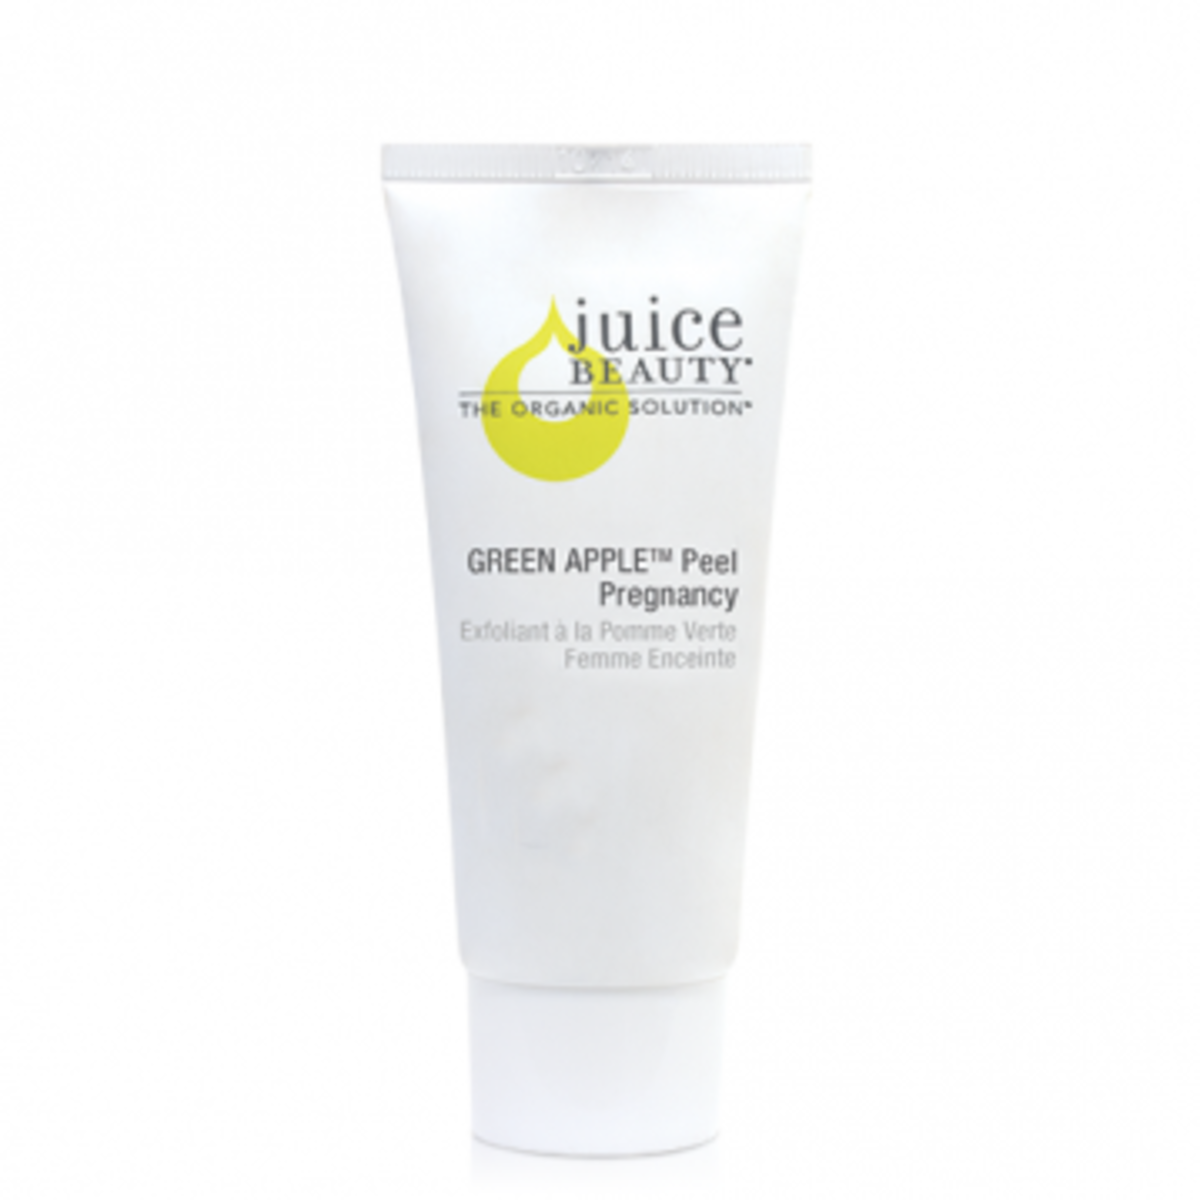 Green Apple Peel Pregnancy, $39, available at Juice Beauty.